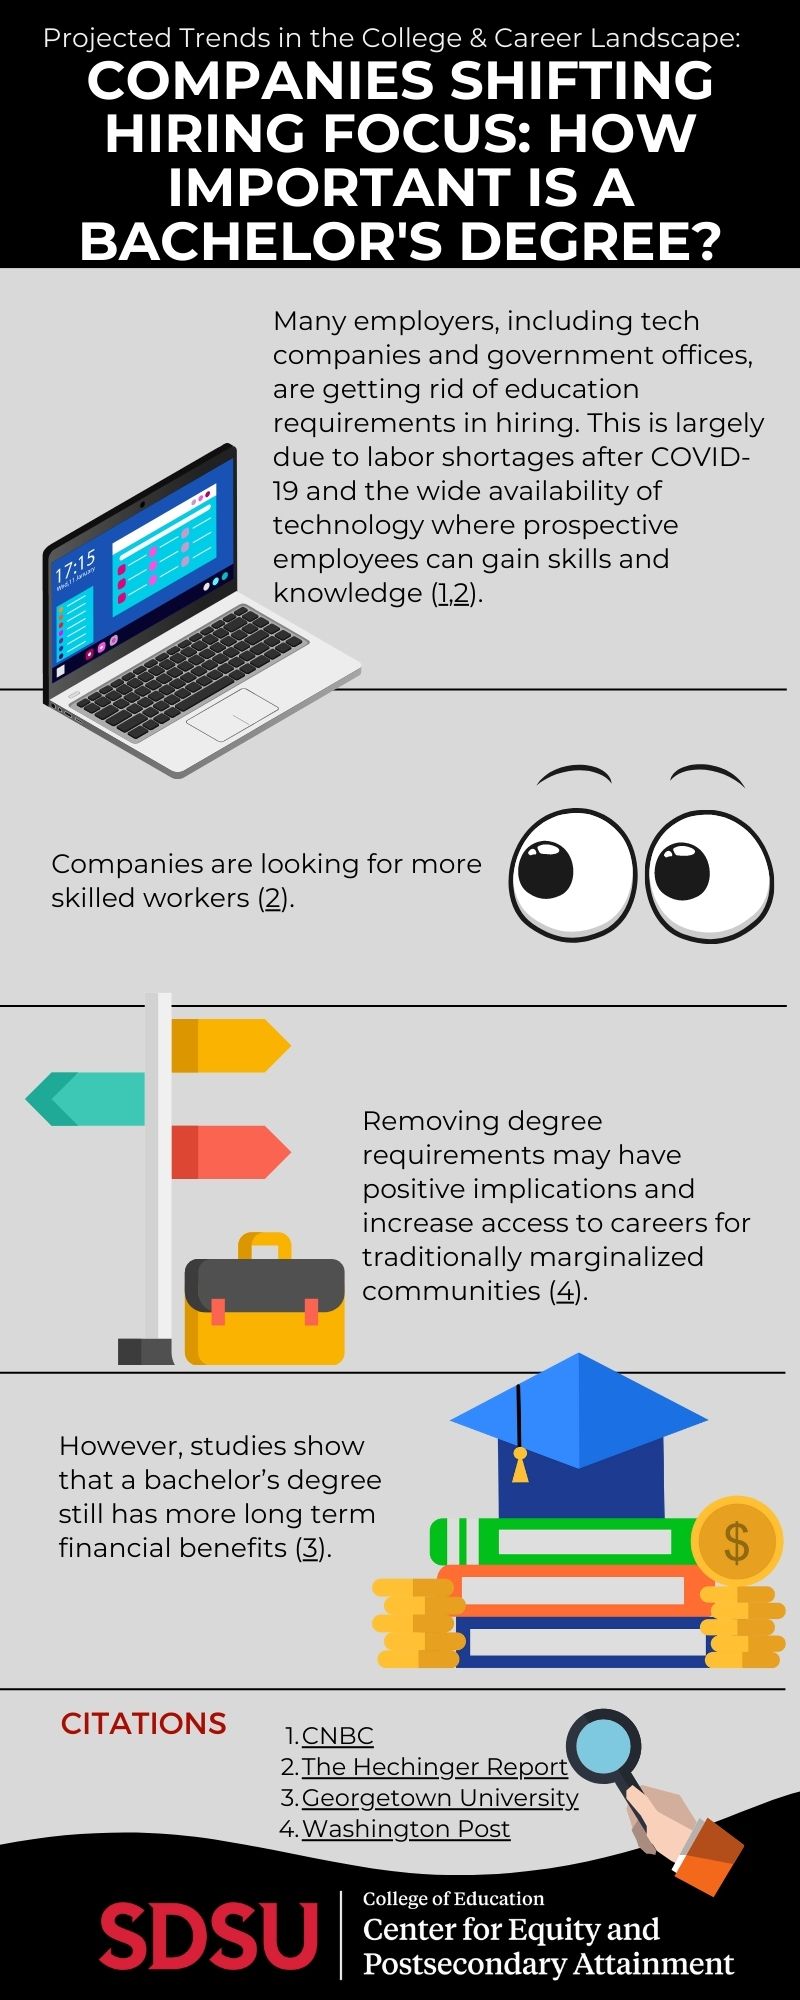 Companies Shifting Hiring Focus: How important is a bachelor's degree?